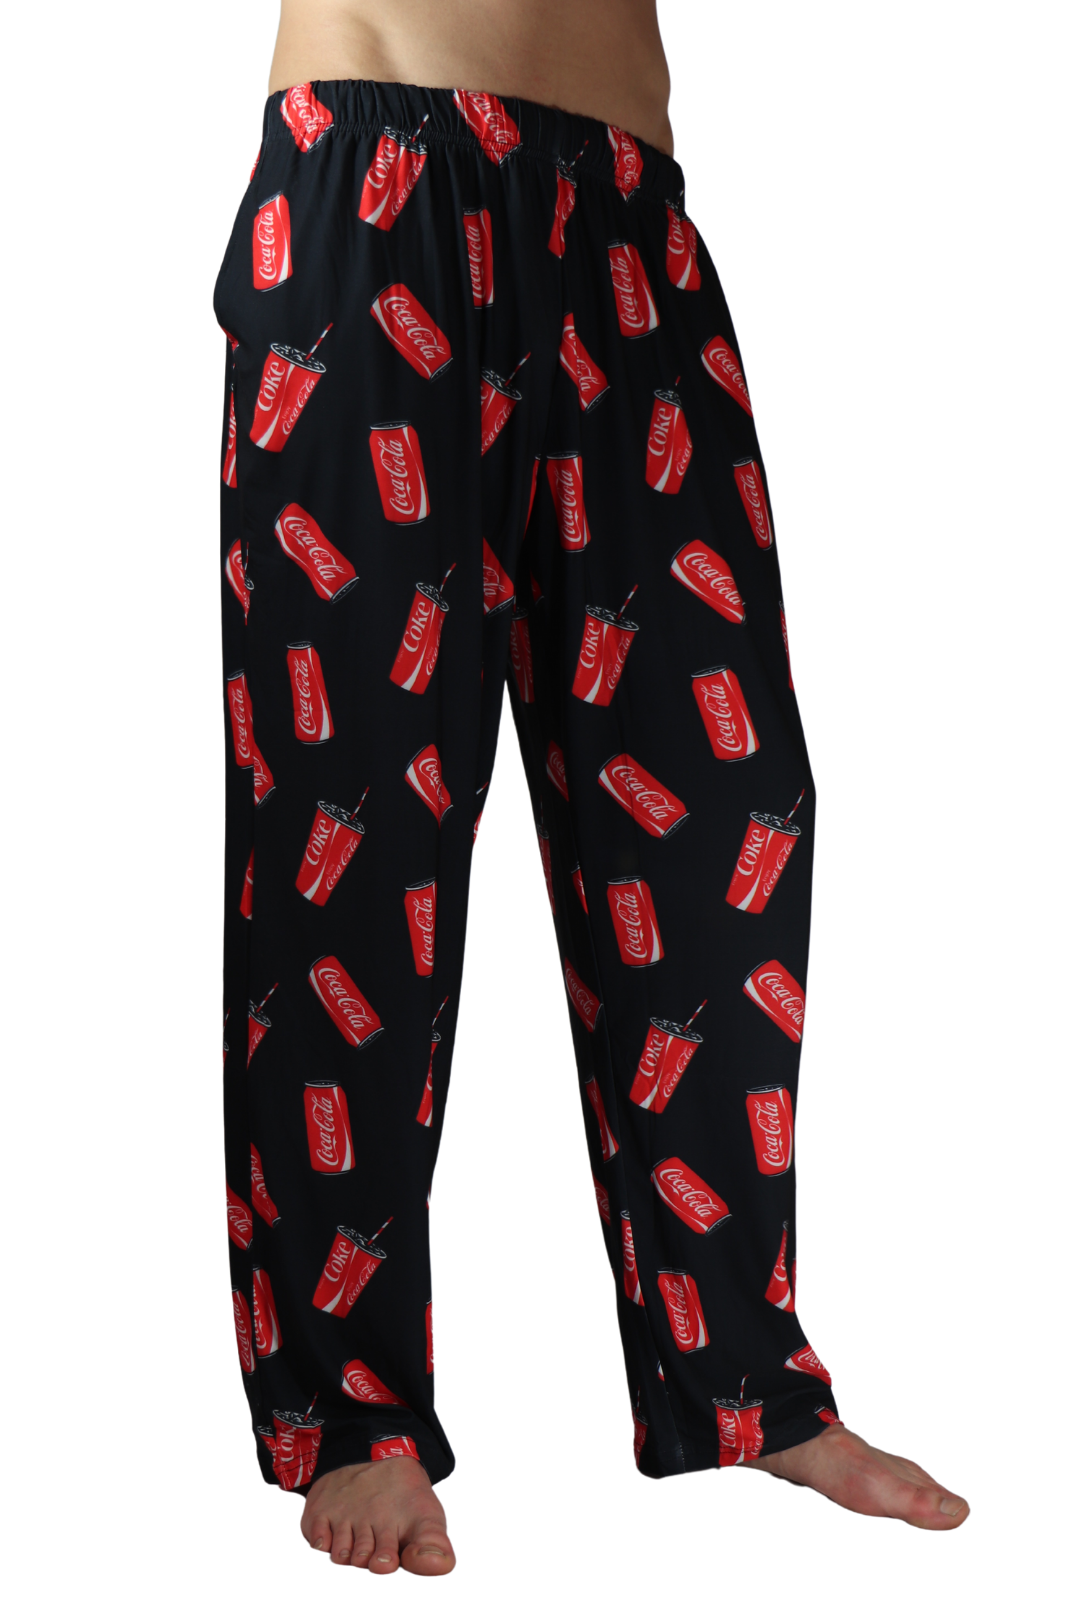 Coca-Cola Can & Cup Pattern Pajama Lounge Pants on model right side angle view